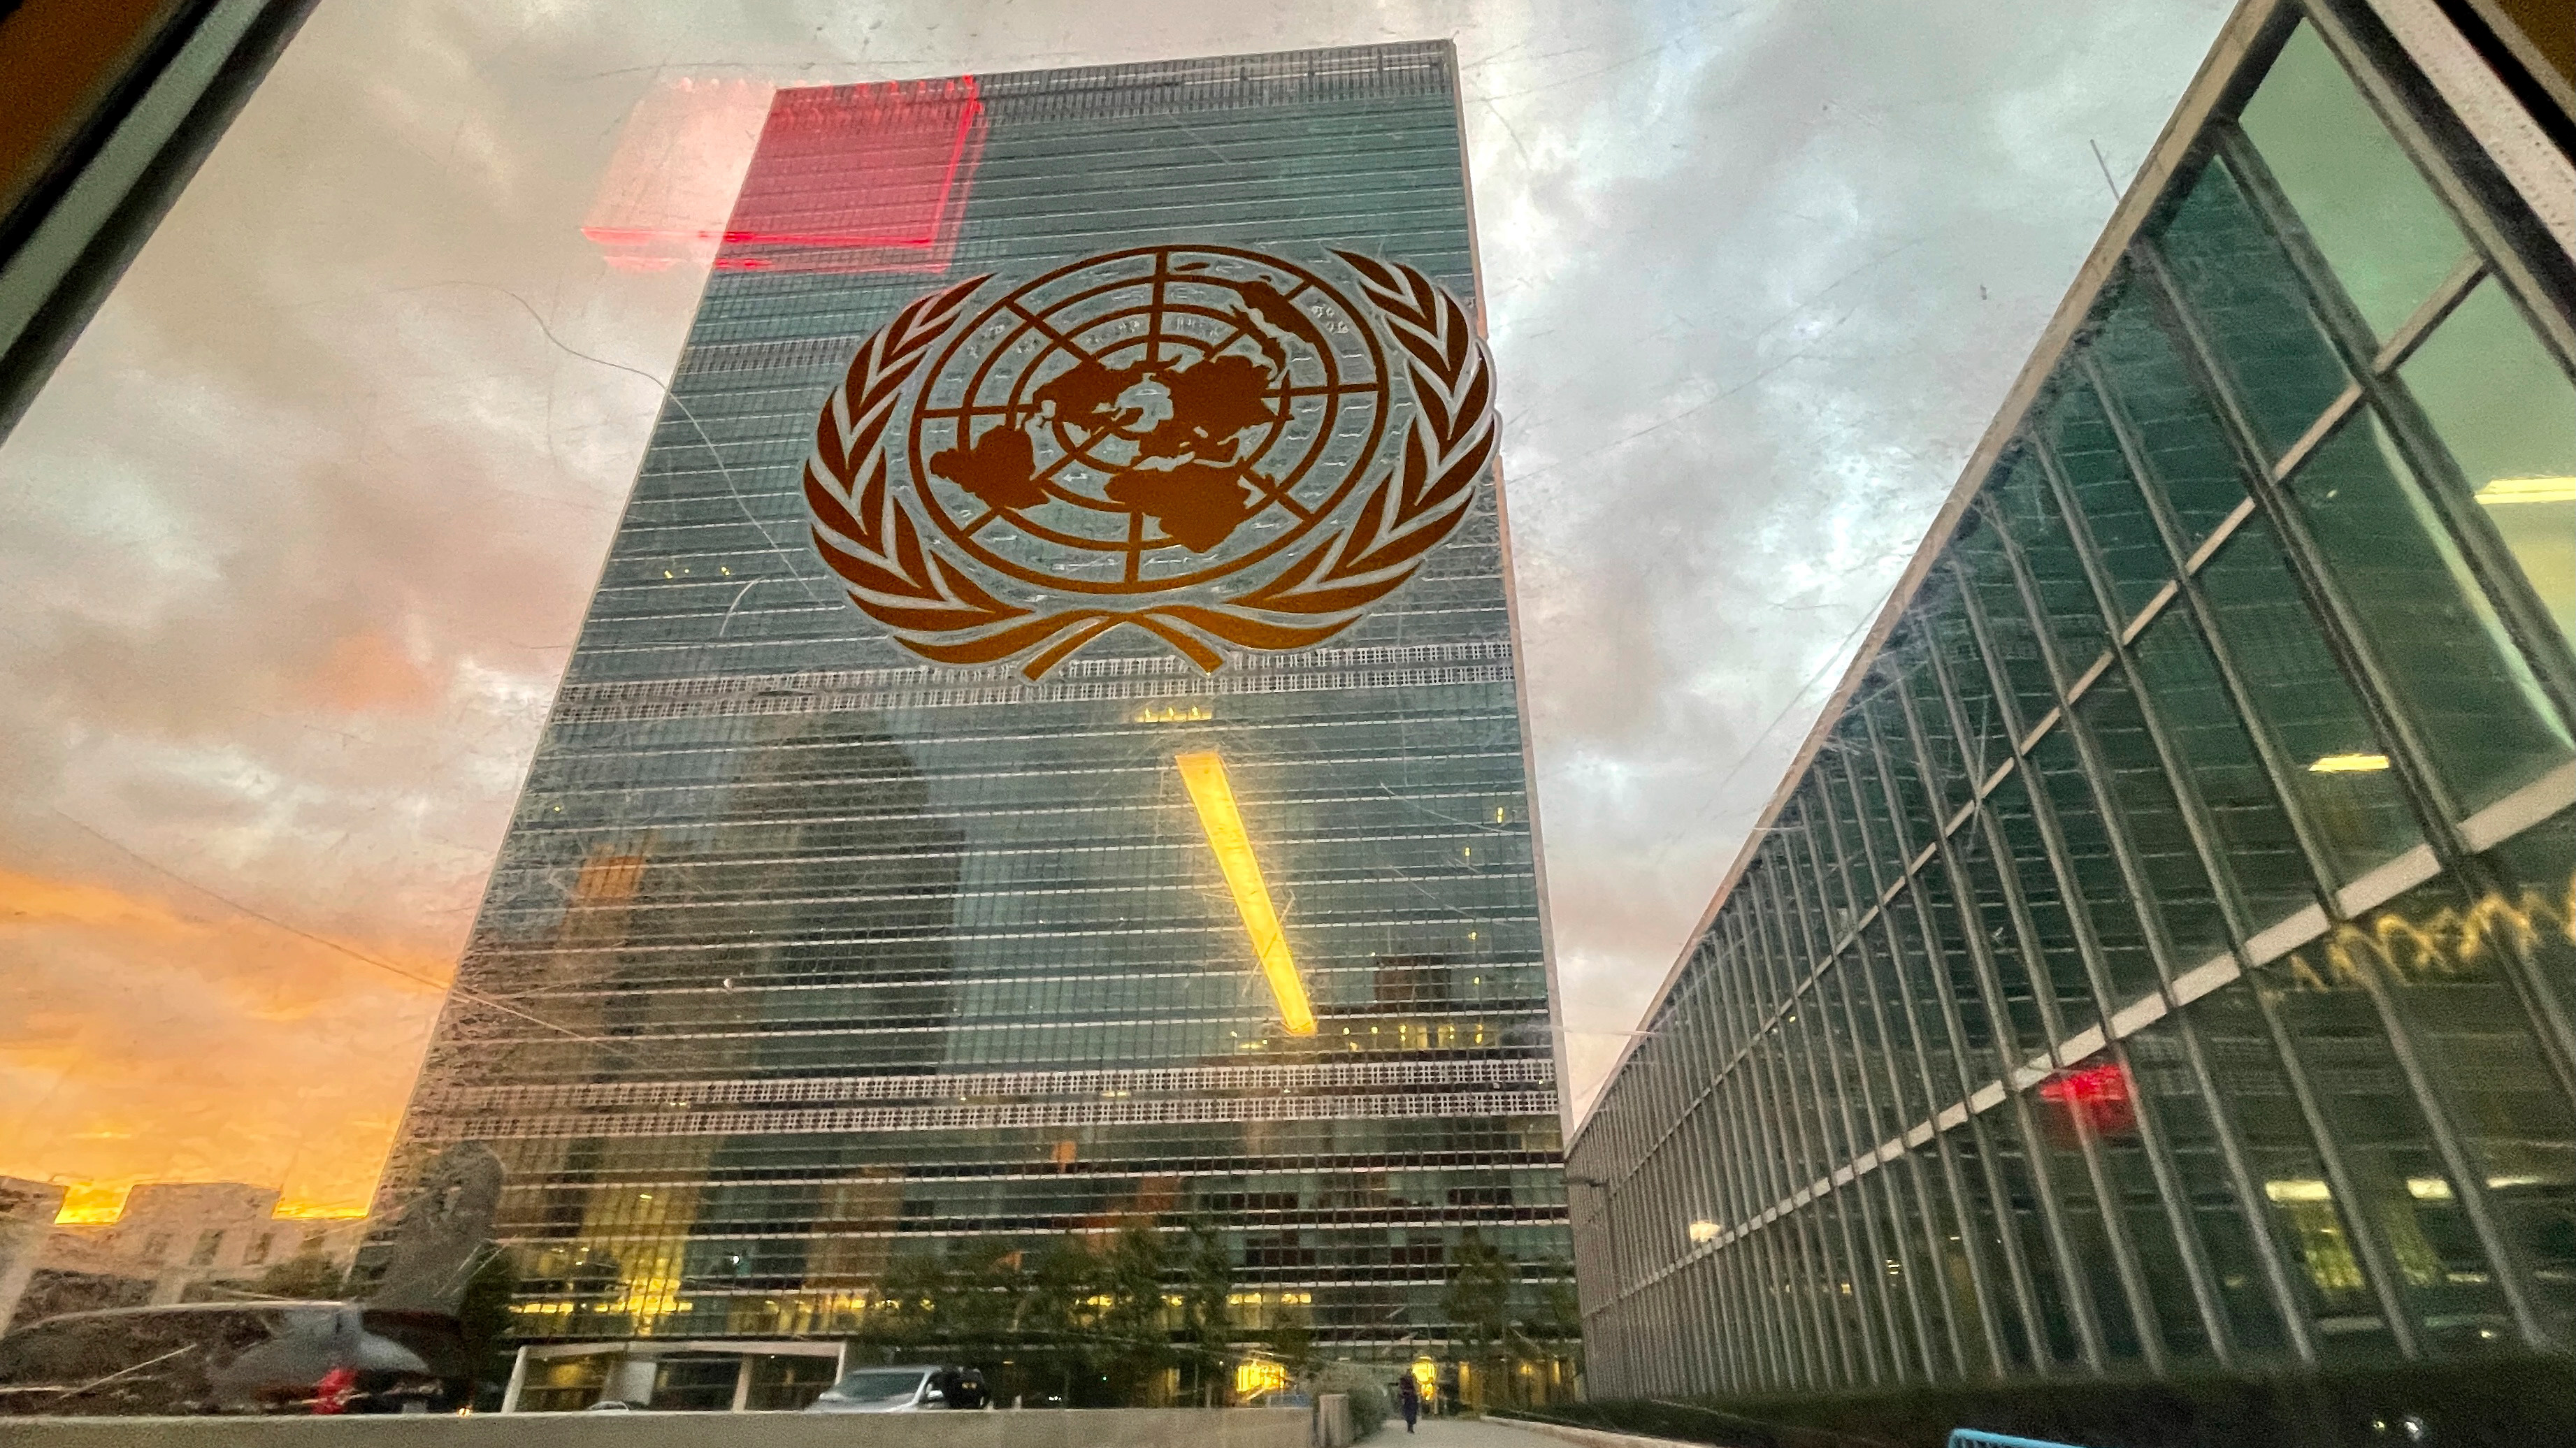 The United Nations headquarters building is seen from inside the General Assembly Hall in New York City, United States, September 21, 2021. /AP